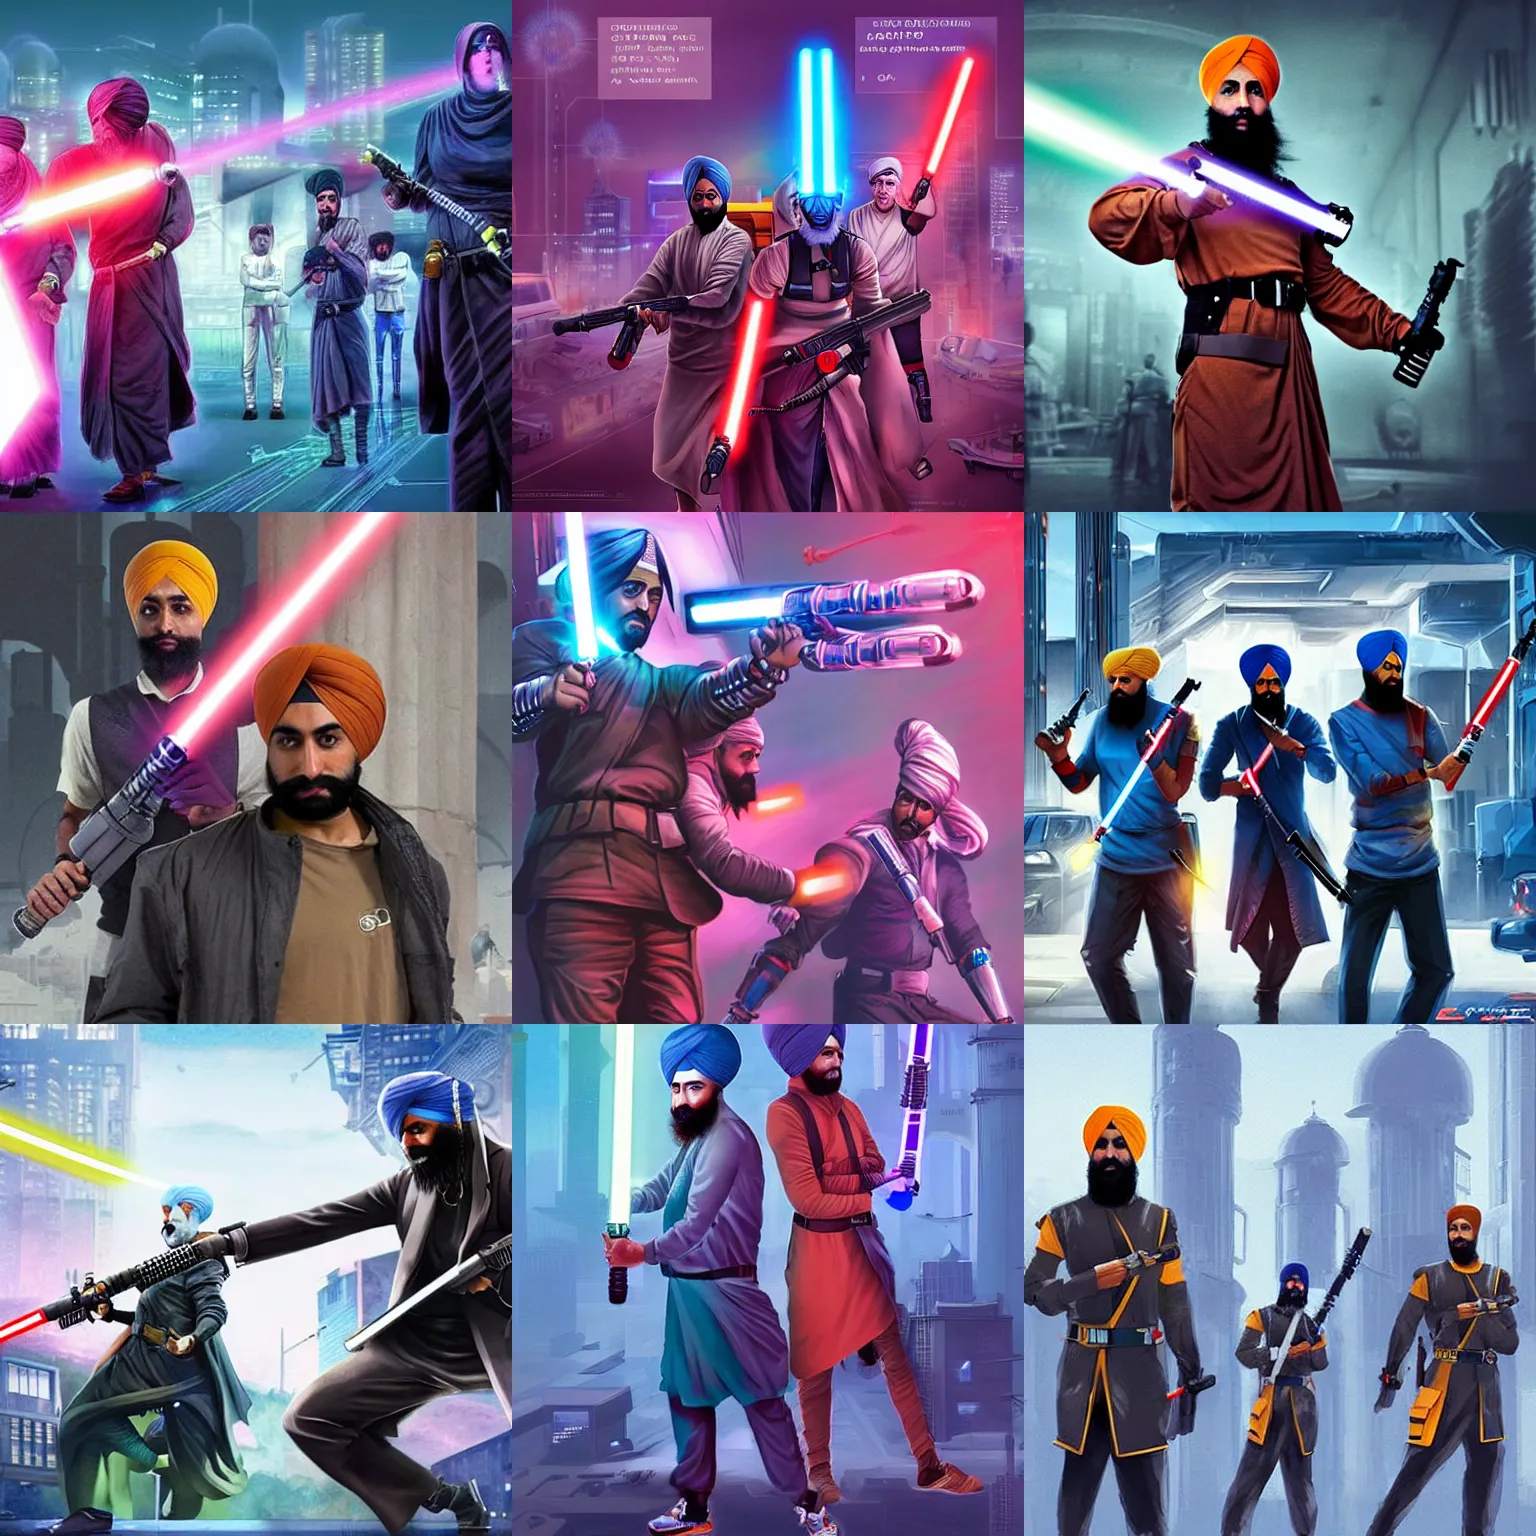 Prompt: sikh cyberempire, everyone is wielding lightsabers, flying cars and no crime, cyberpunk aesthetic